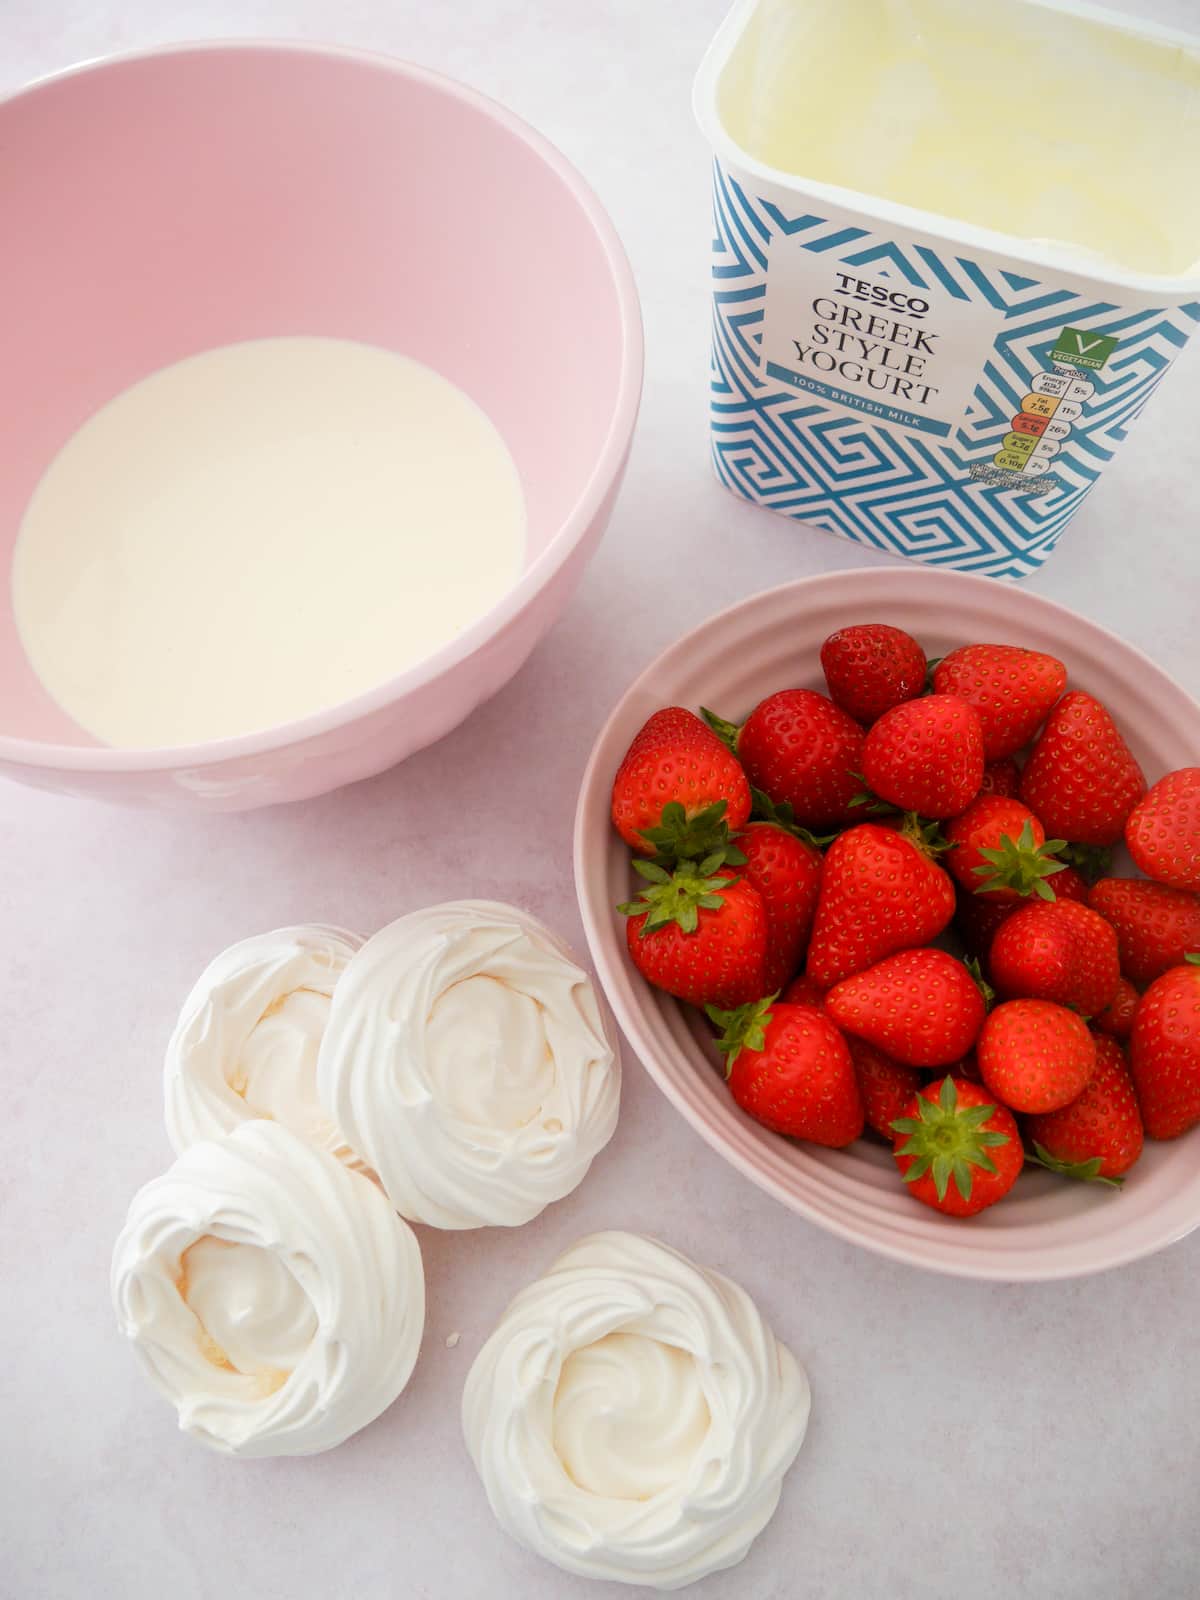 Strawberry mousse recipe ingredients.